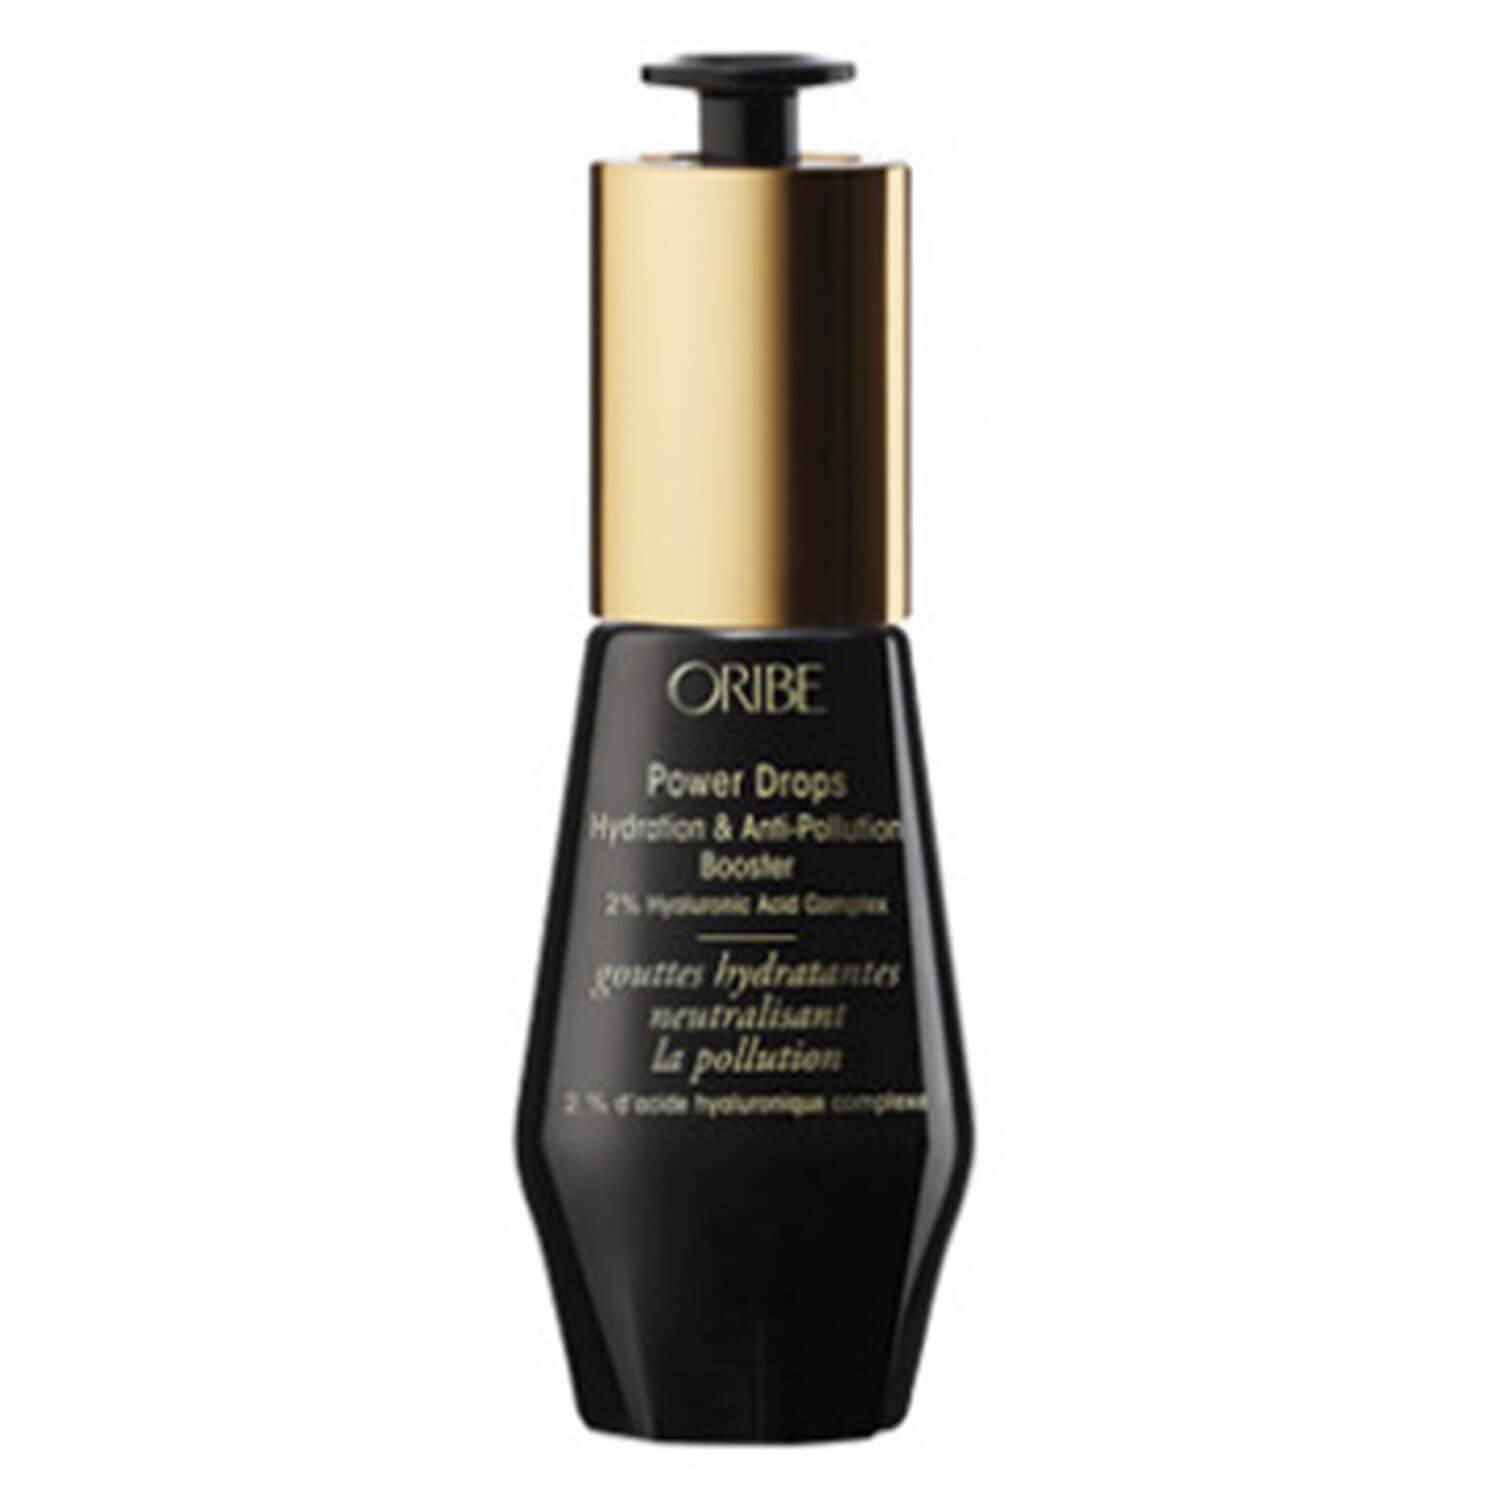 Oribe Care - Power Drops Hydration & Anti-Pollution Booster